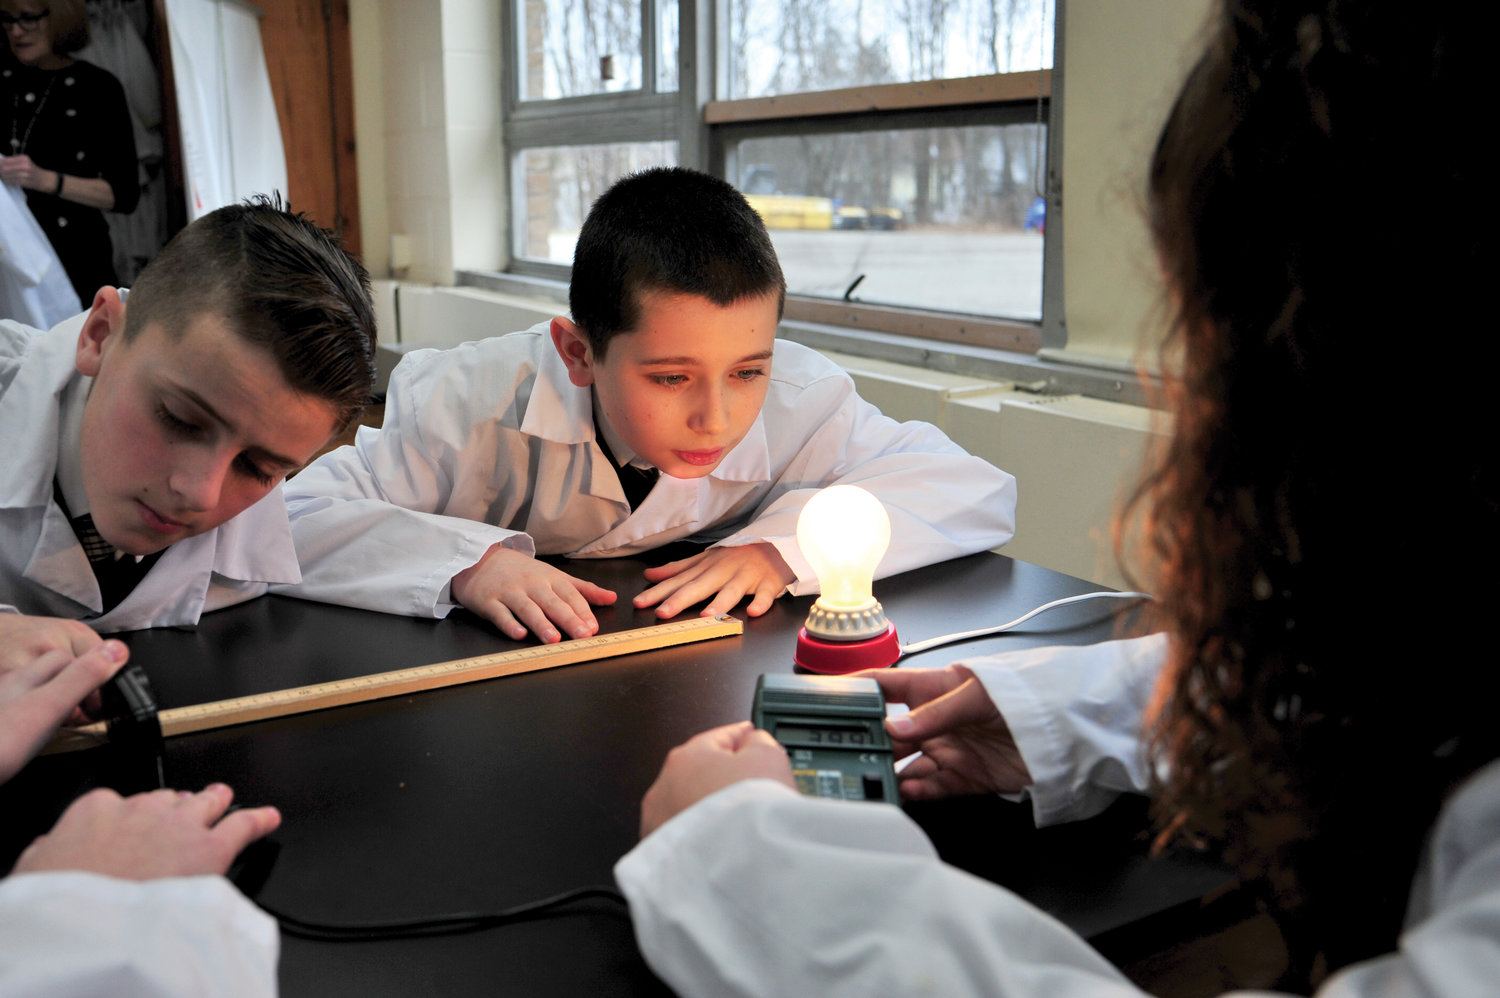 Sixth-grader John Cassidy, center, participates in an experiment involving electricity with classmates at St. Denis-St. Columba School in Hopewell Junction Jan. 10.